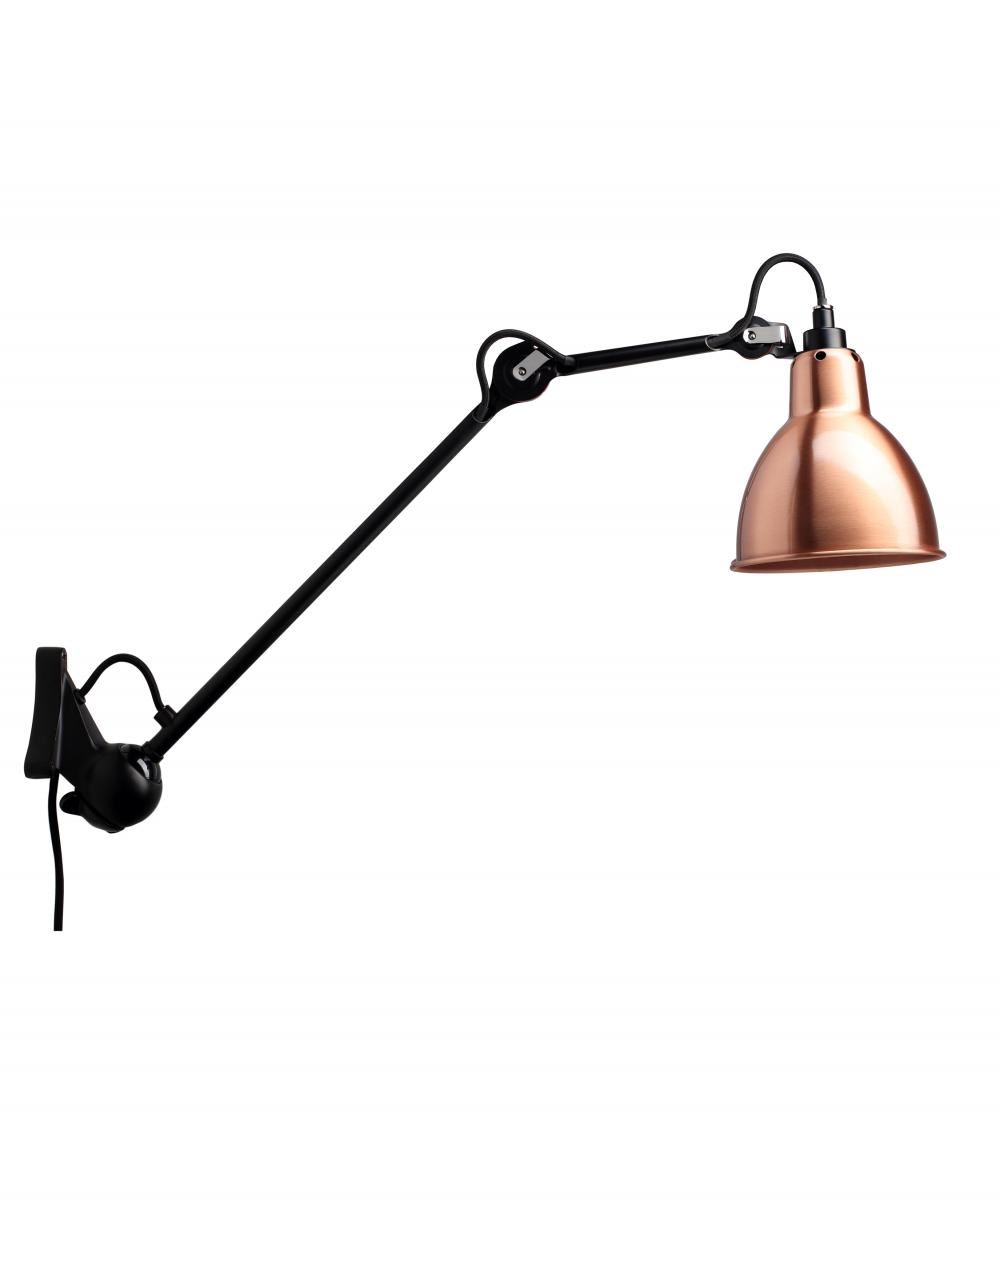 Lampe Gras 222 Wall Light Black Arm Copper Shade With White Interior Round Shade